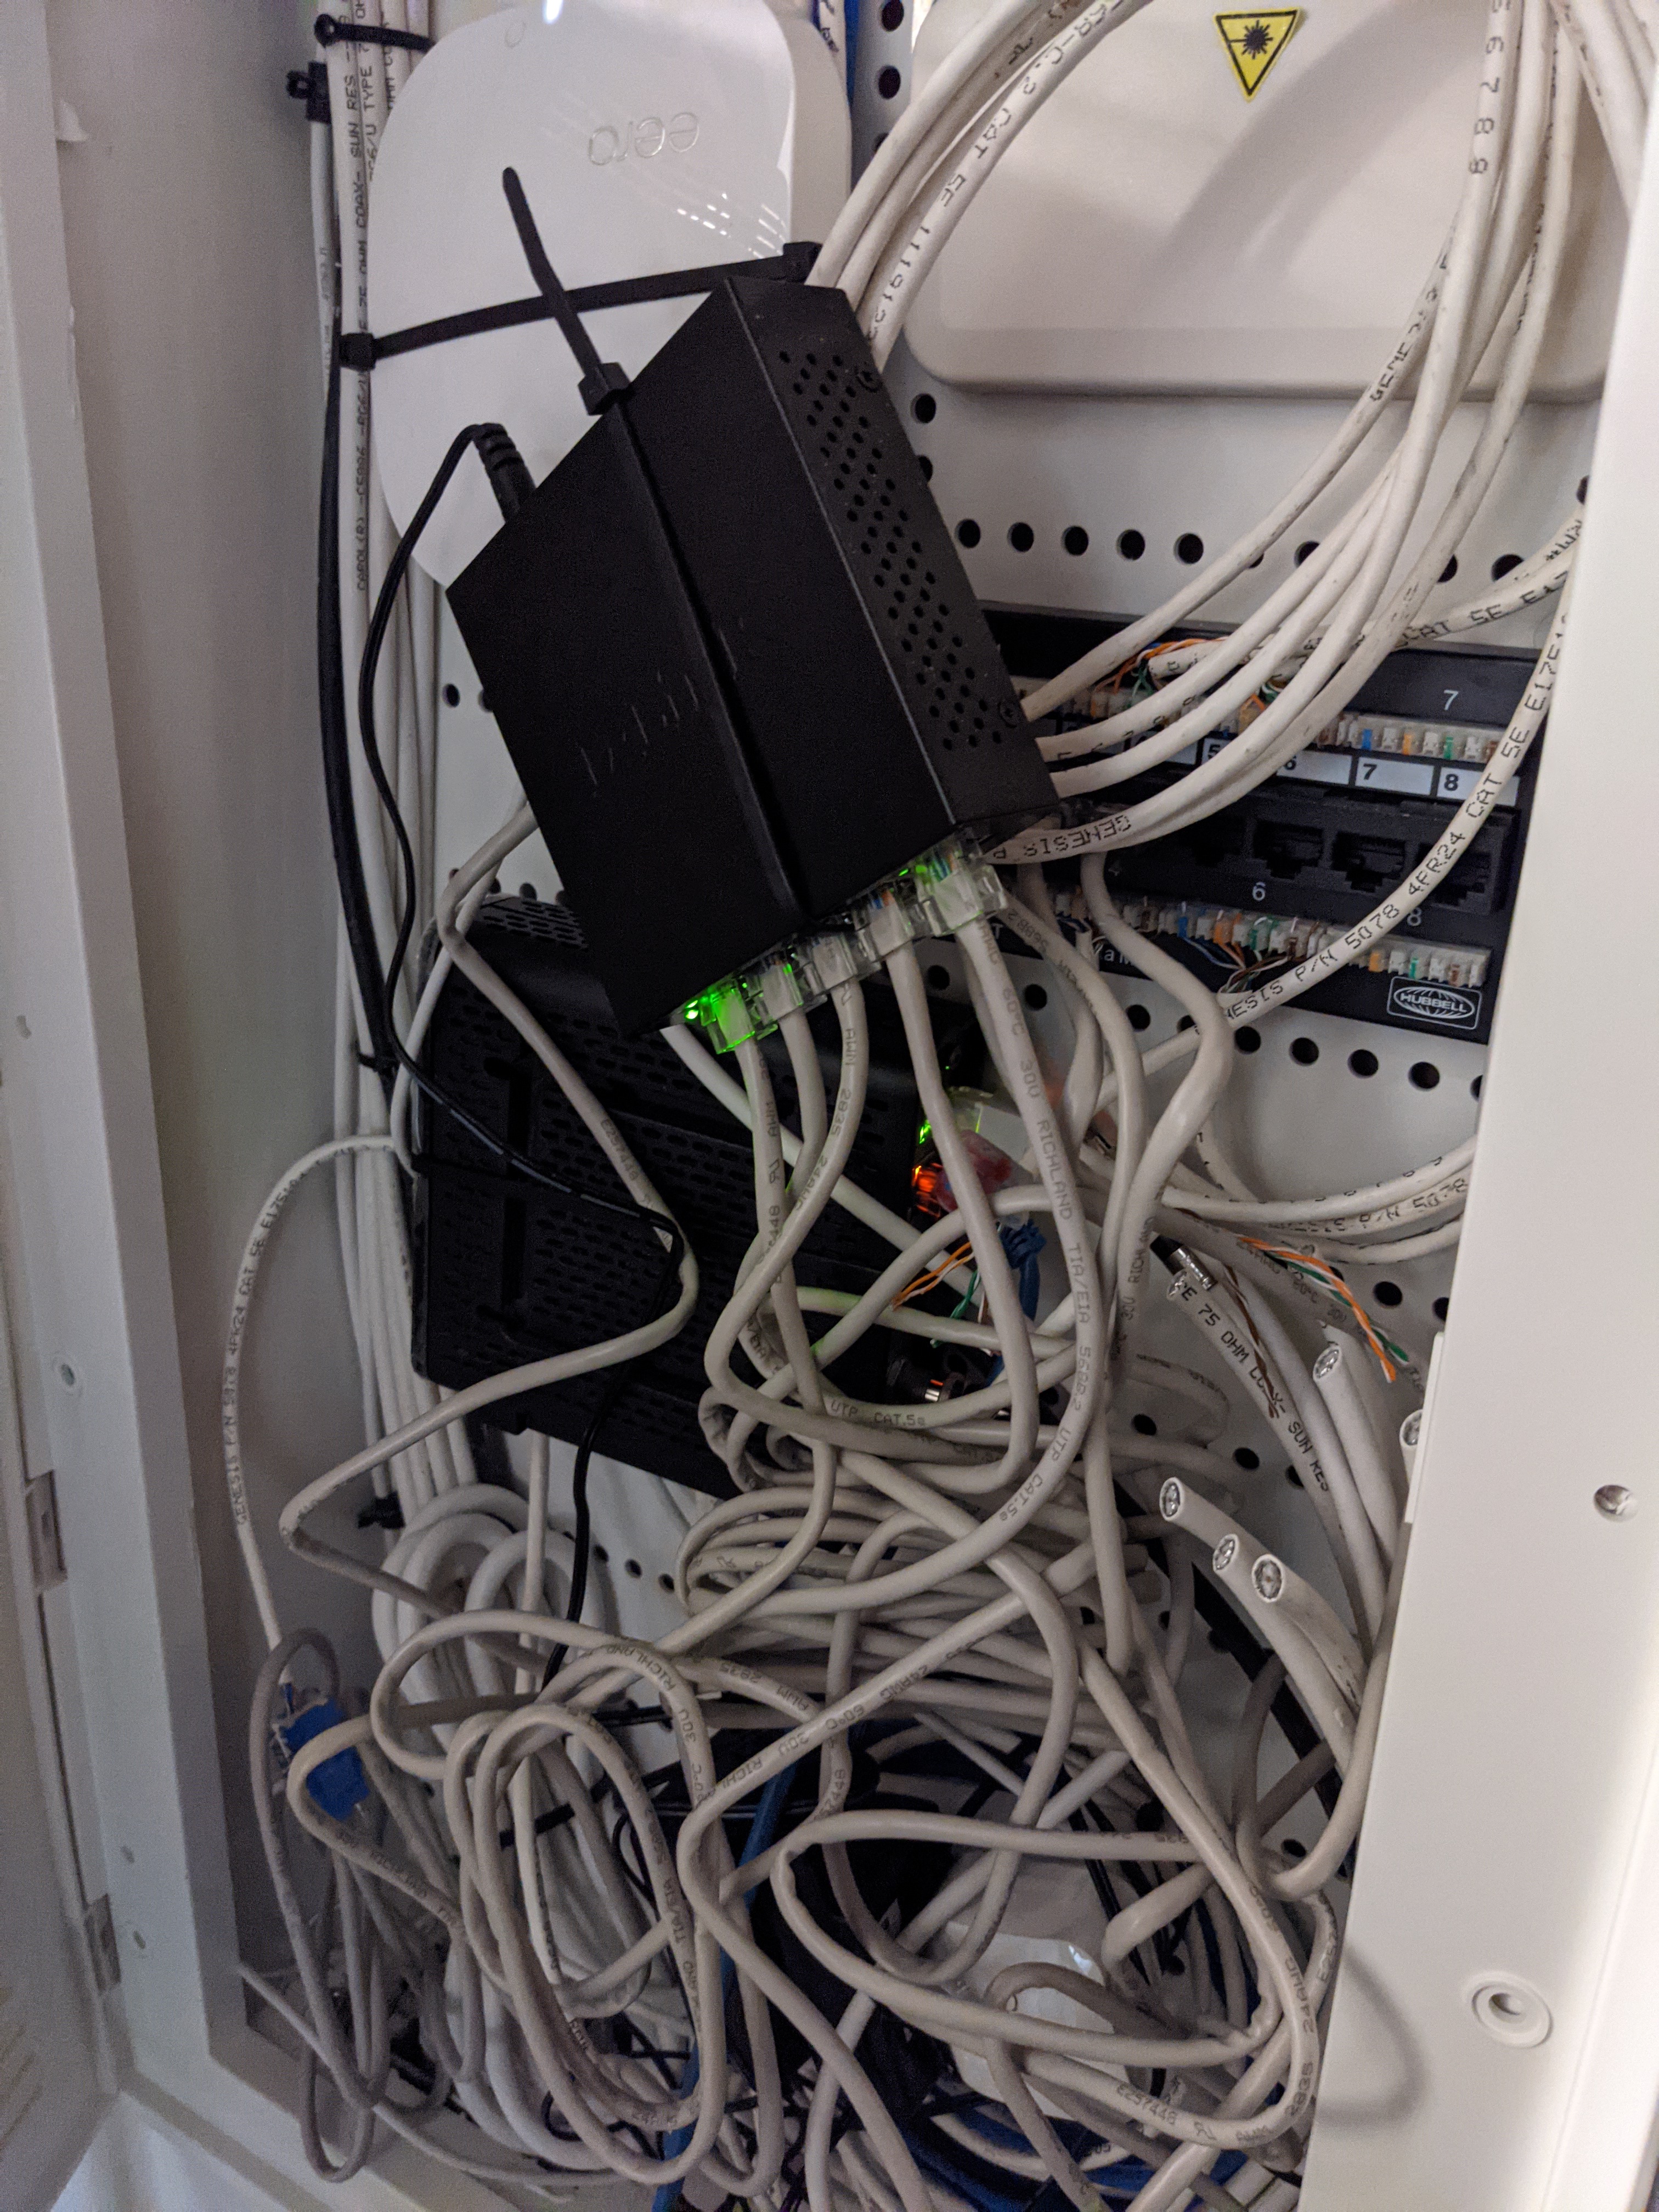 Messy cabinet of cables strung about.